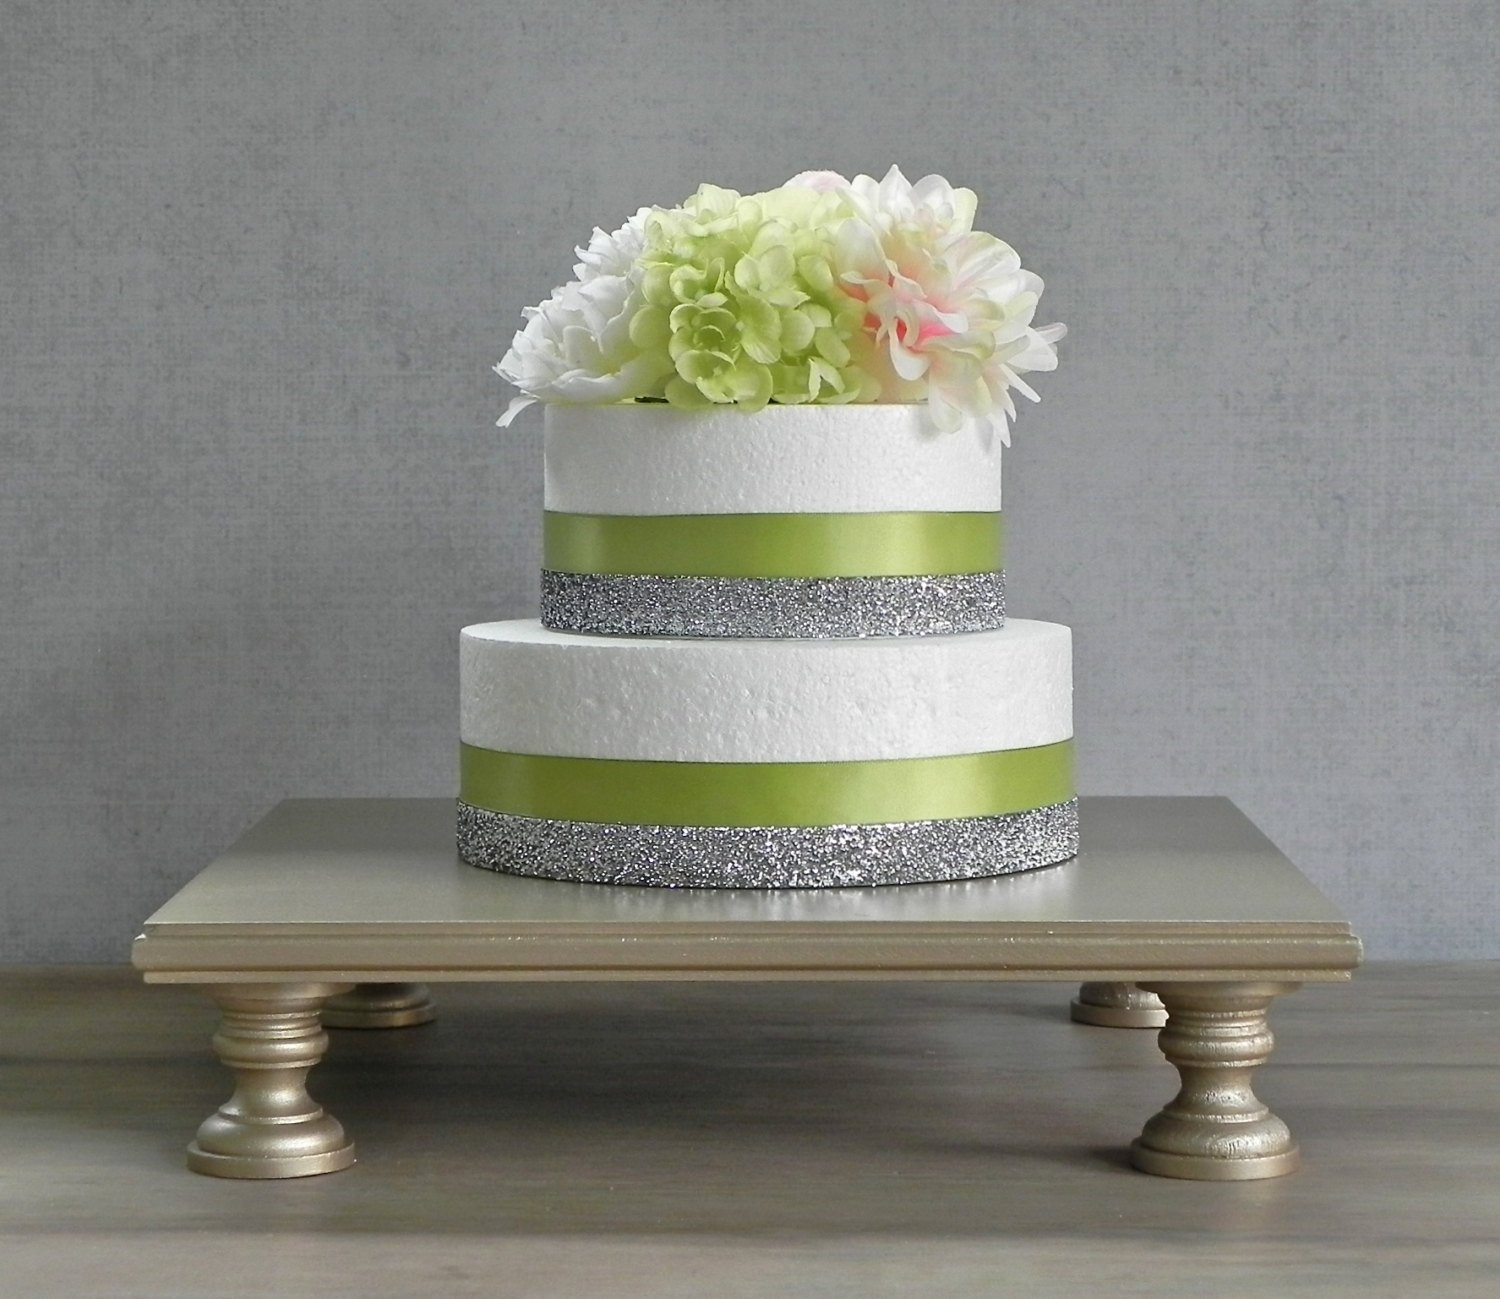 Square Cake Stand For Wedding Cakes
 14 Wedding Cake Stand Champagne Square Cupcake by